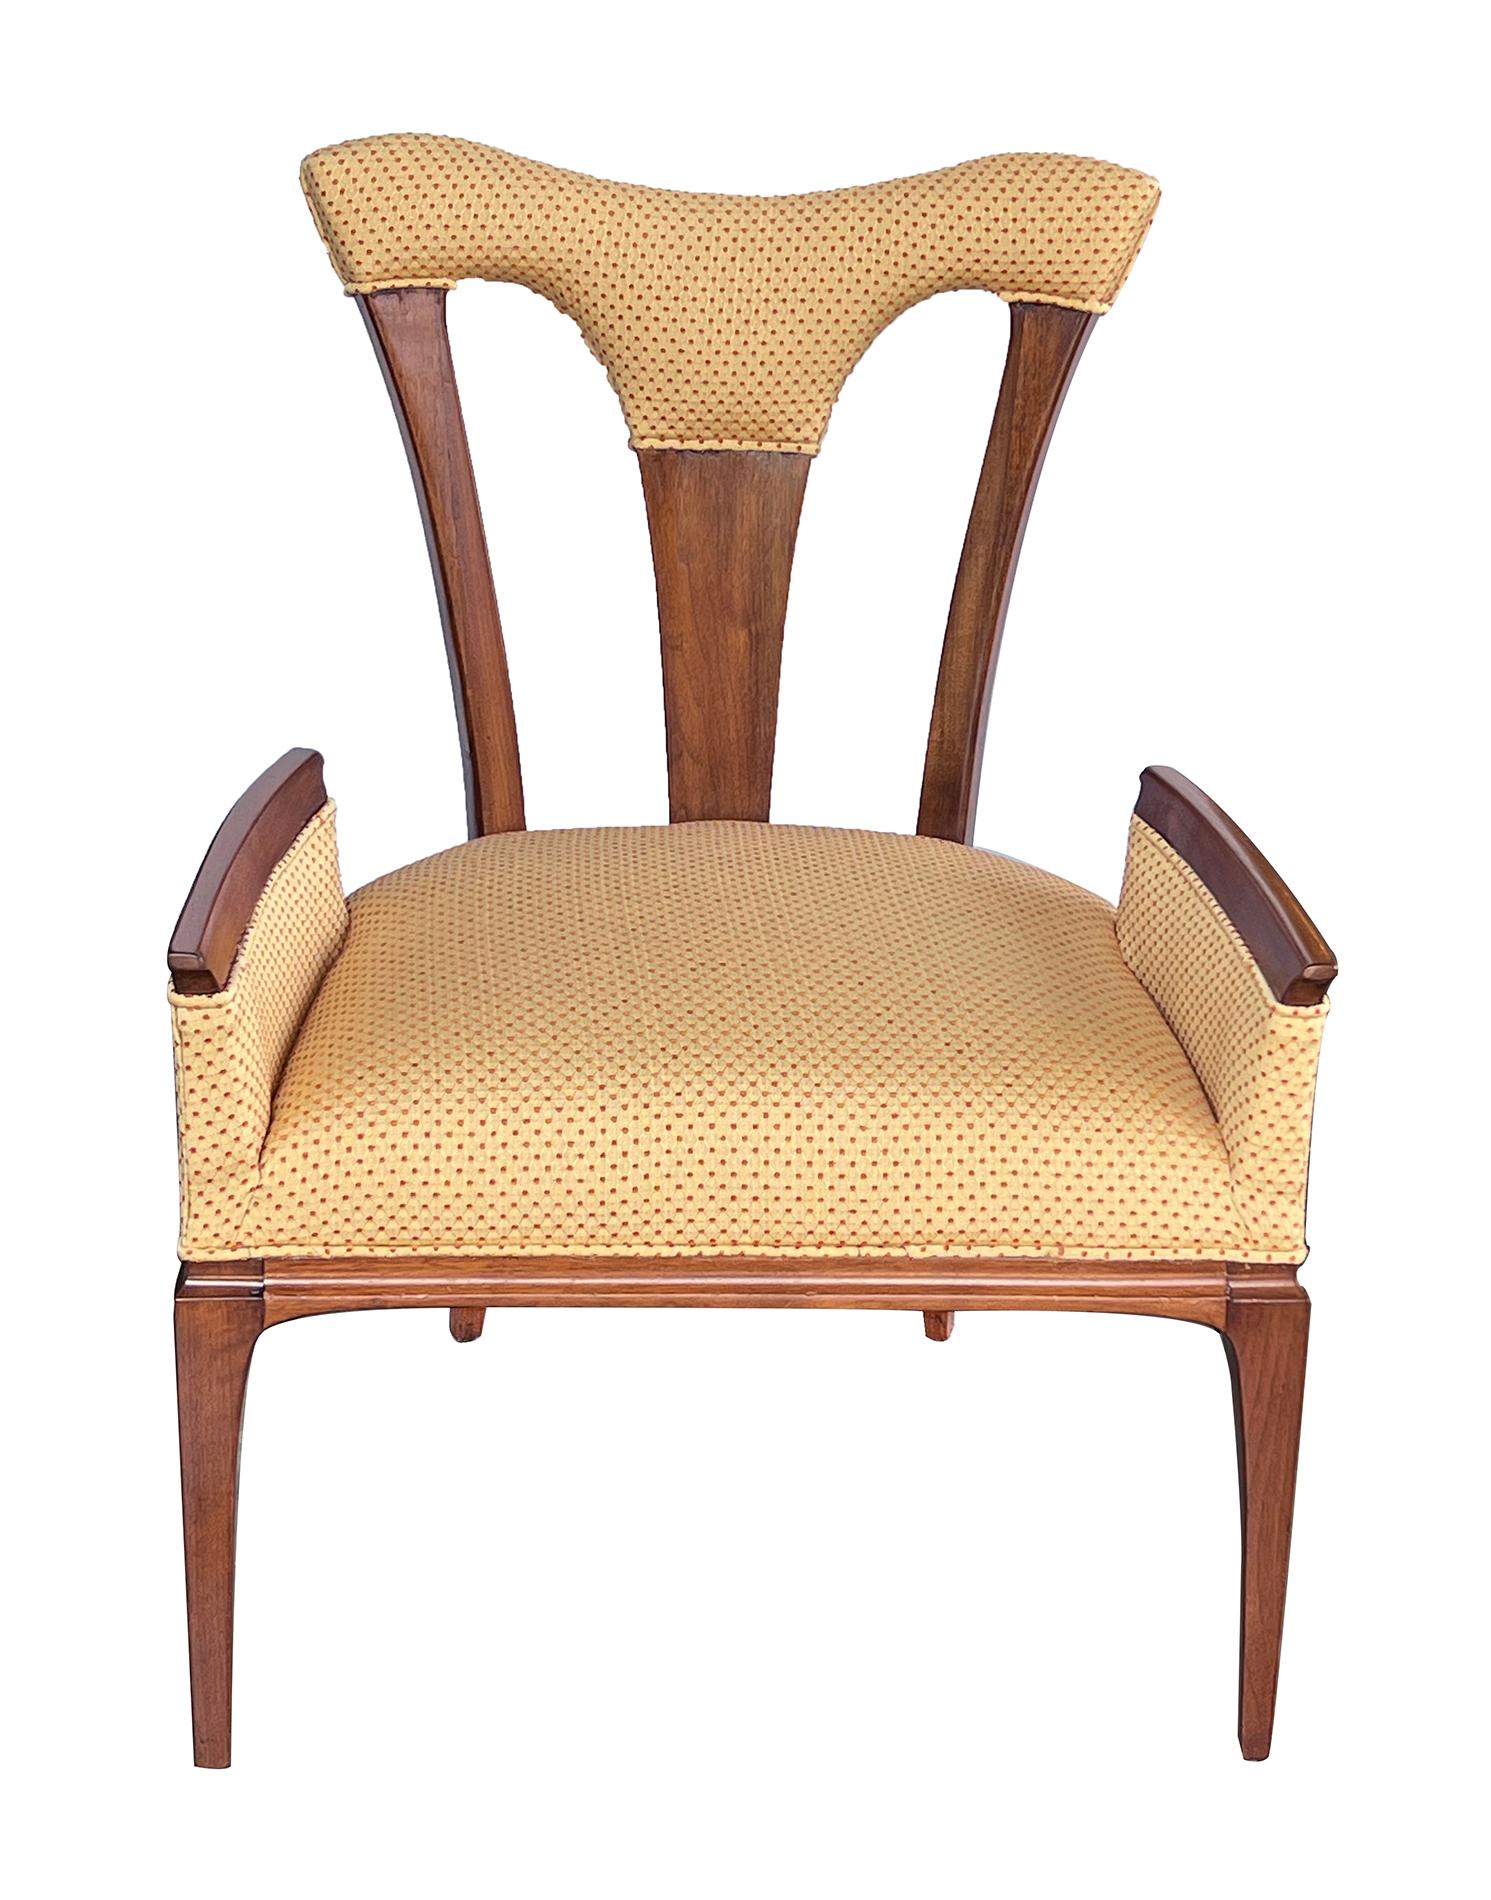 each with padded crest rail above an openwork back over a tight seat with a channeled apron; flanked by upright arm rests